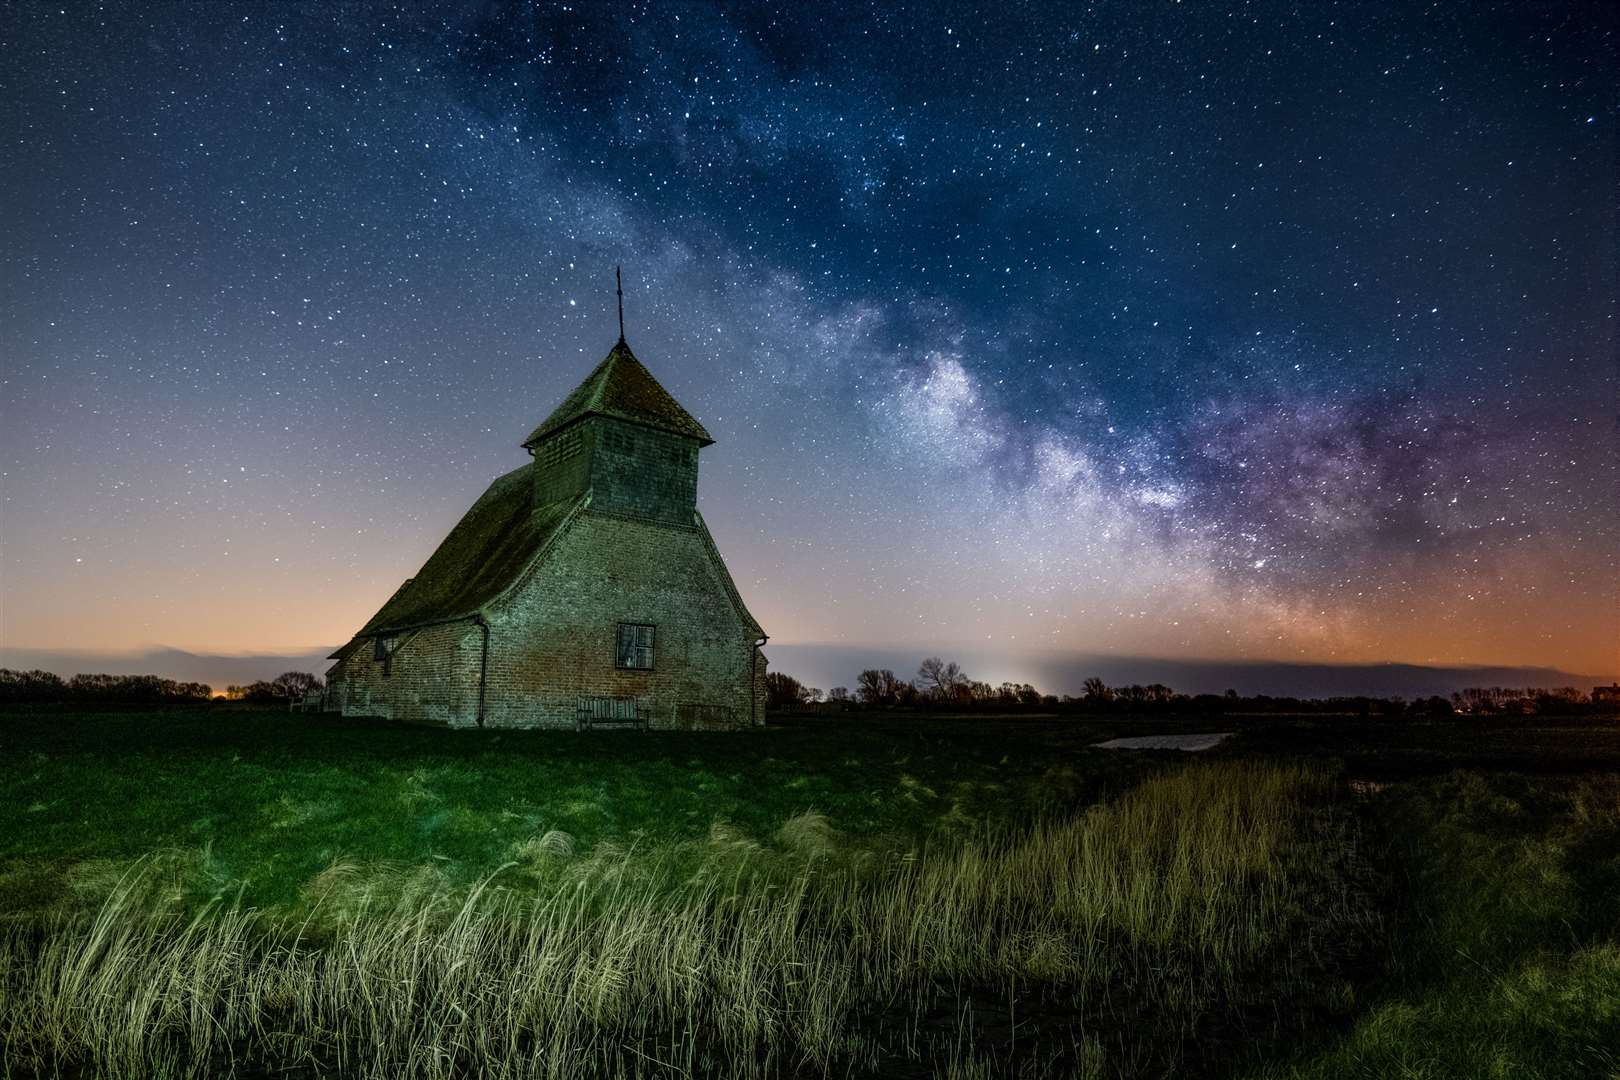 Chris said one of his favourite places in Kent to photograph is the St Thomas Becket Church in Romney Marsh